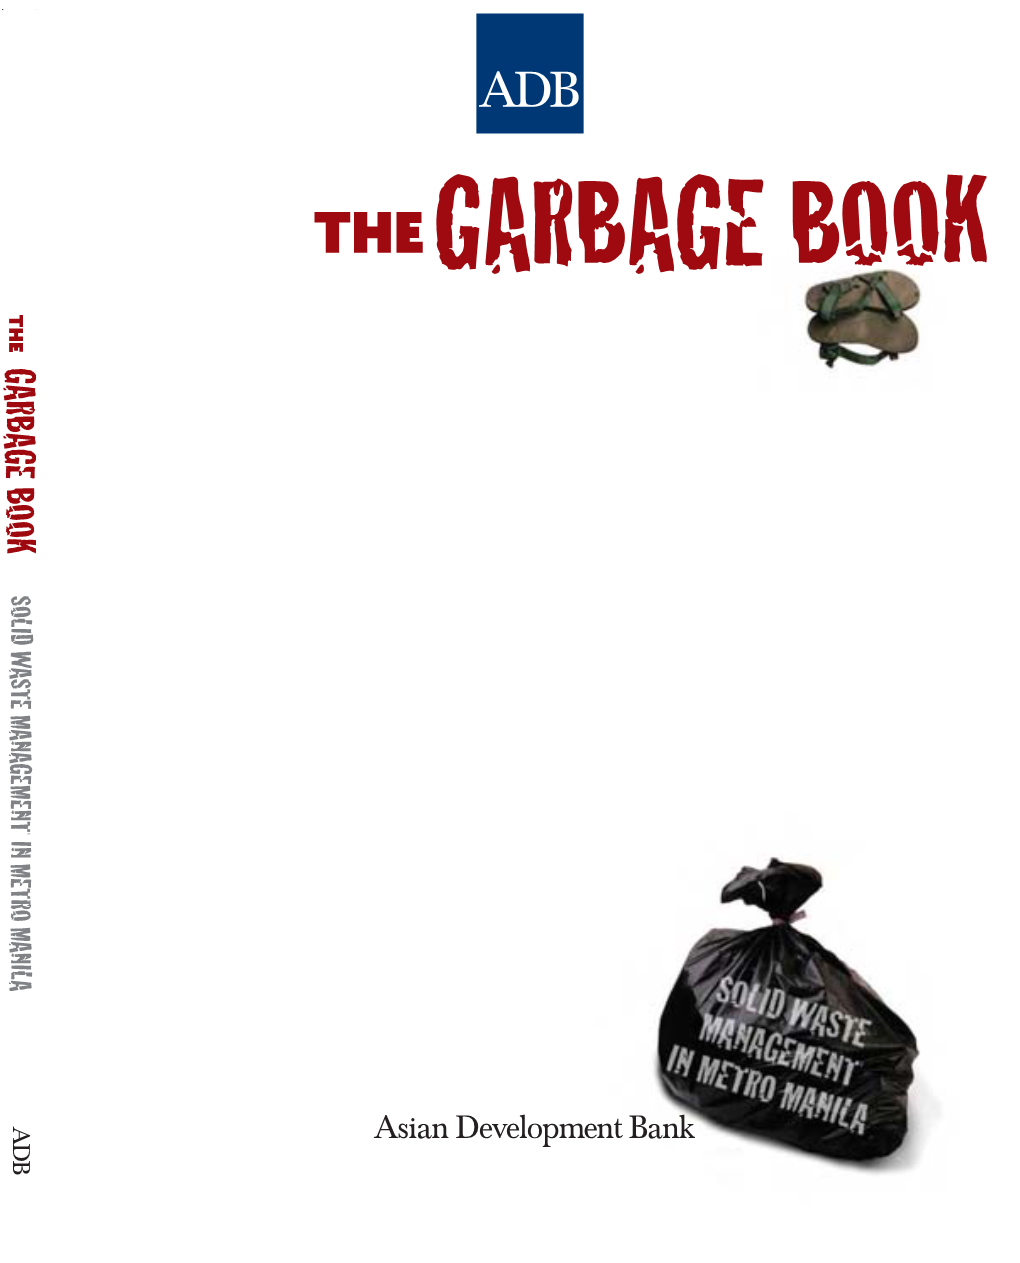 The Garbage Book: Solid Waste Management in Metro Manila